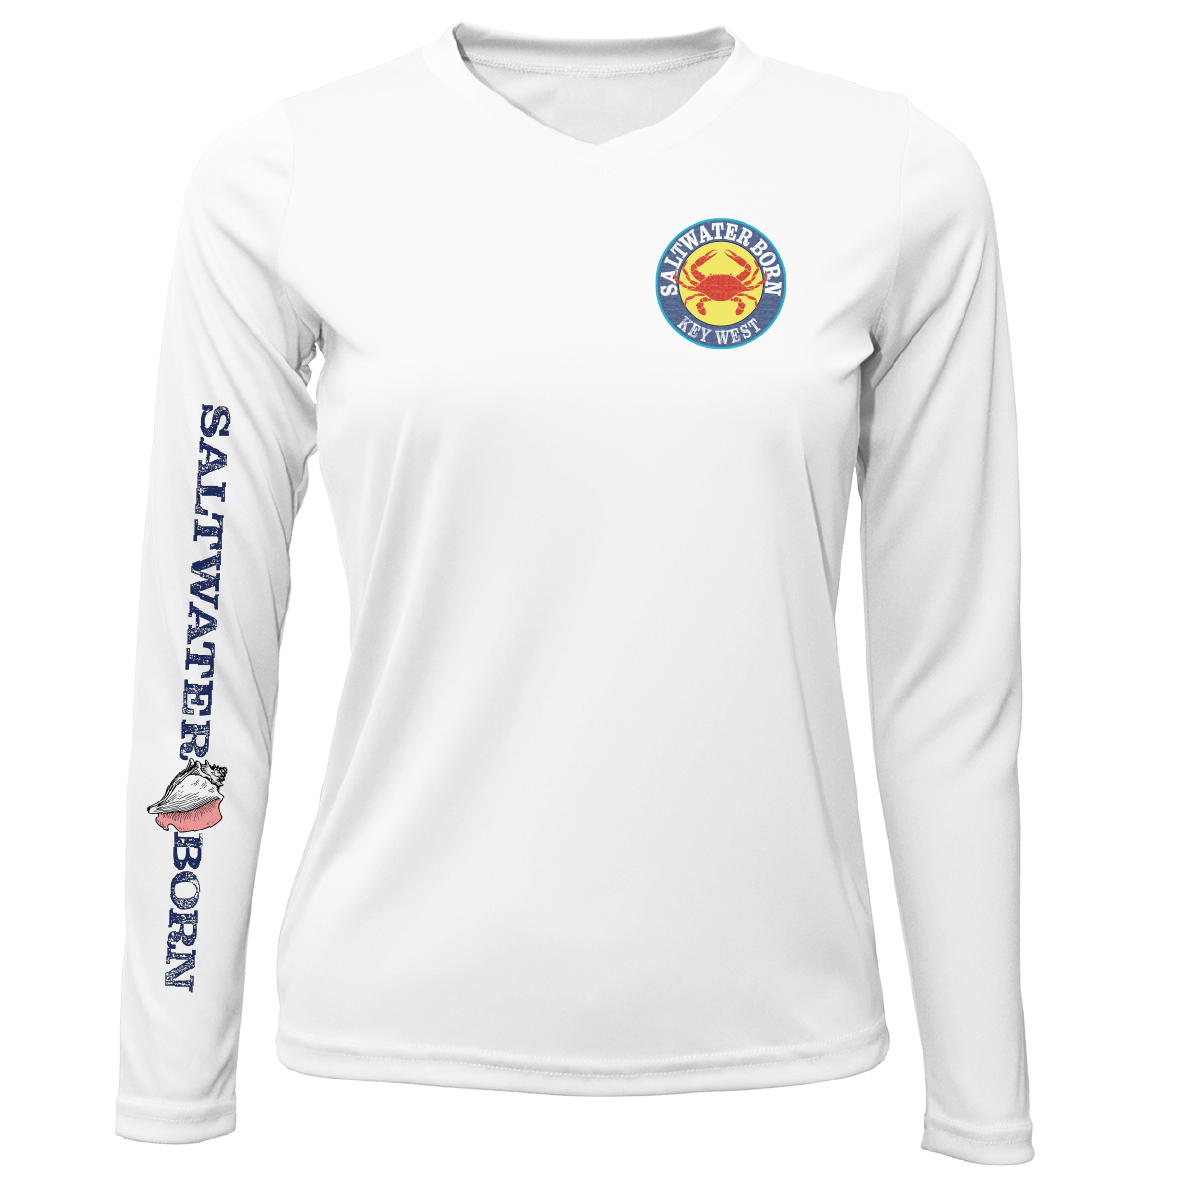 Saltwater Born Shirts S / WHITE Key West Steamed Crab Women's Long Sleeve UPF 50+ Dry-Fit Shirt